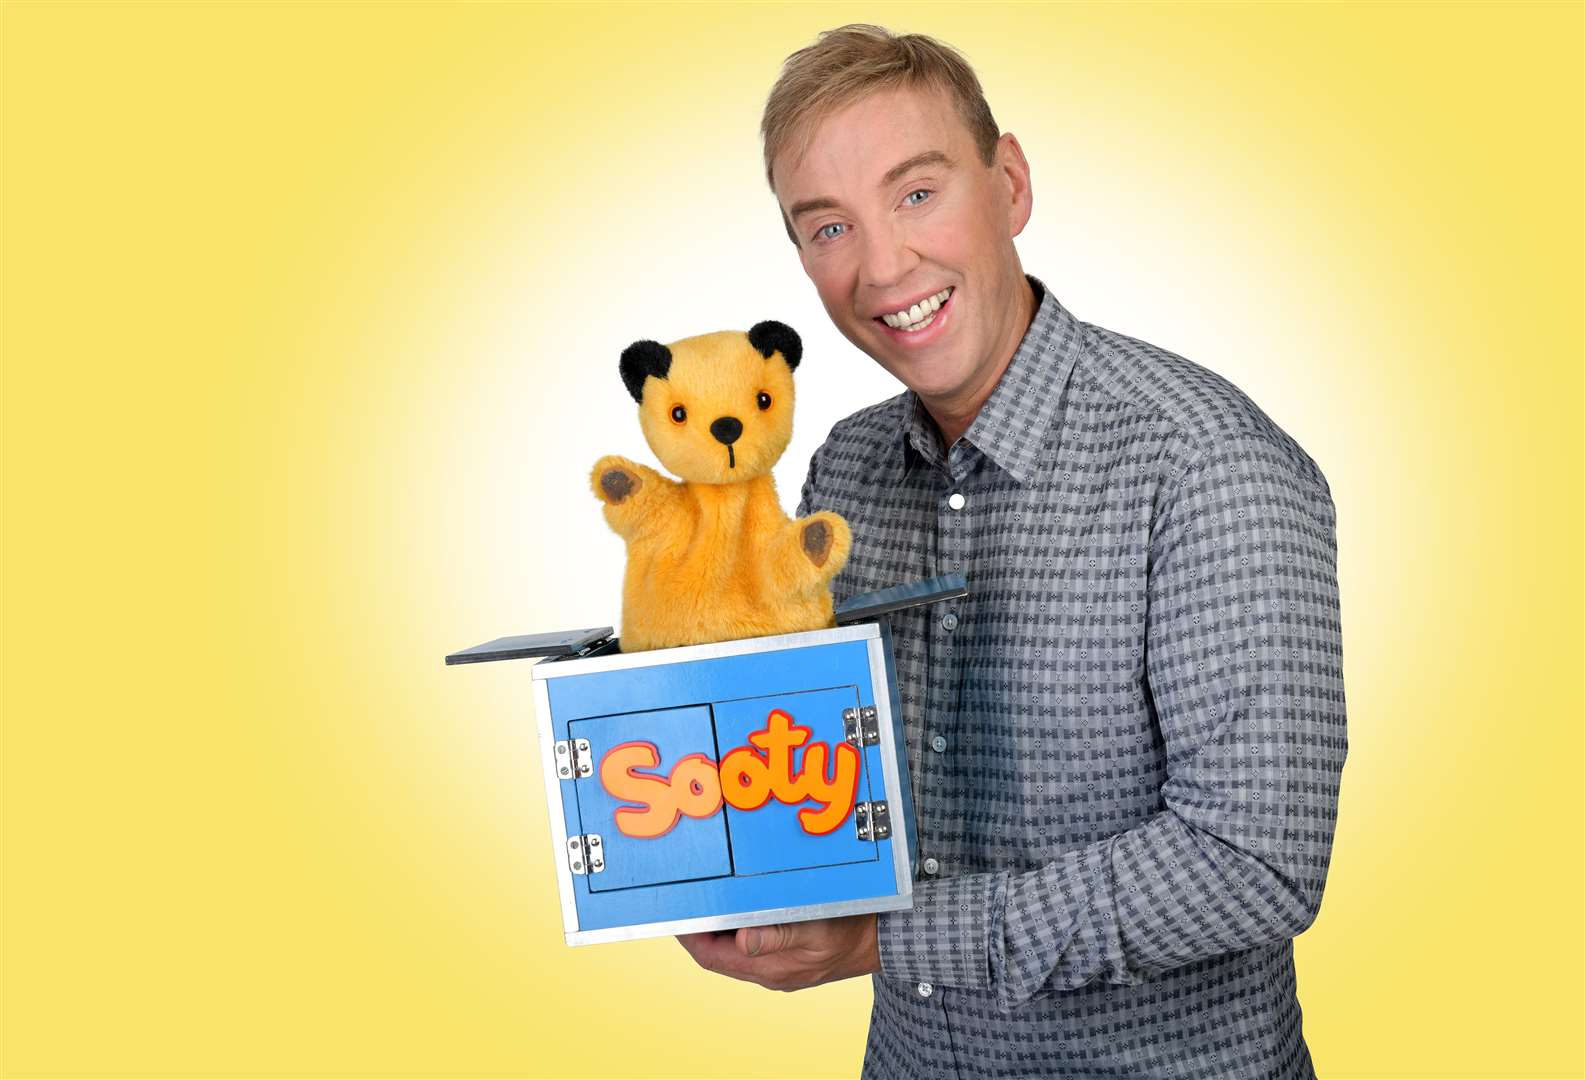 There will be opportunities to meet Sooty, with Richard, after the shows